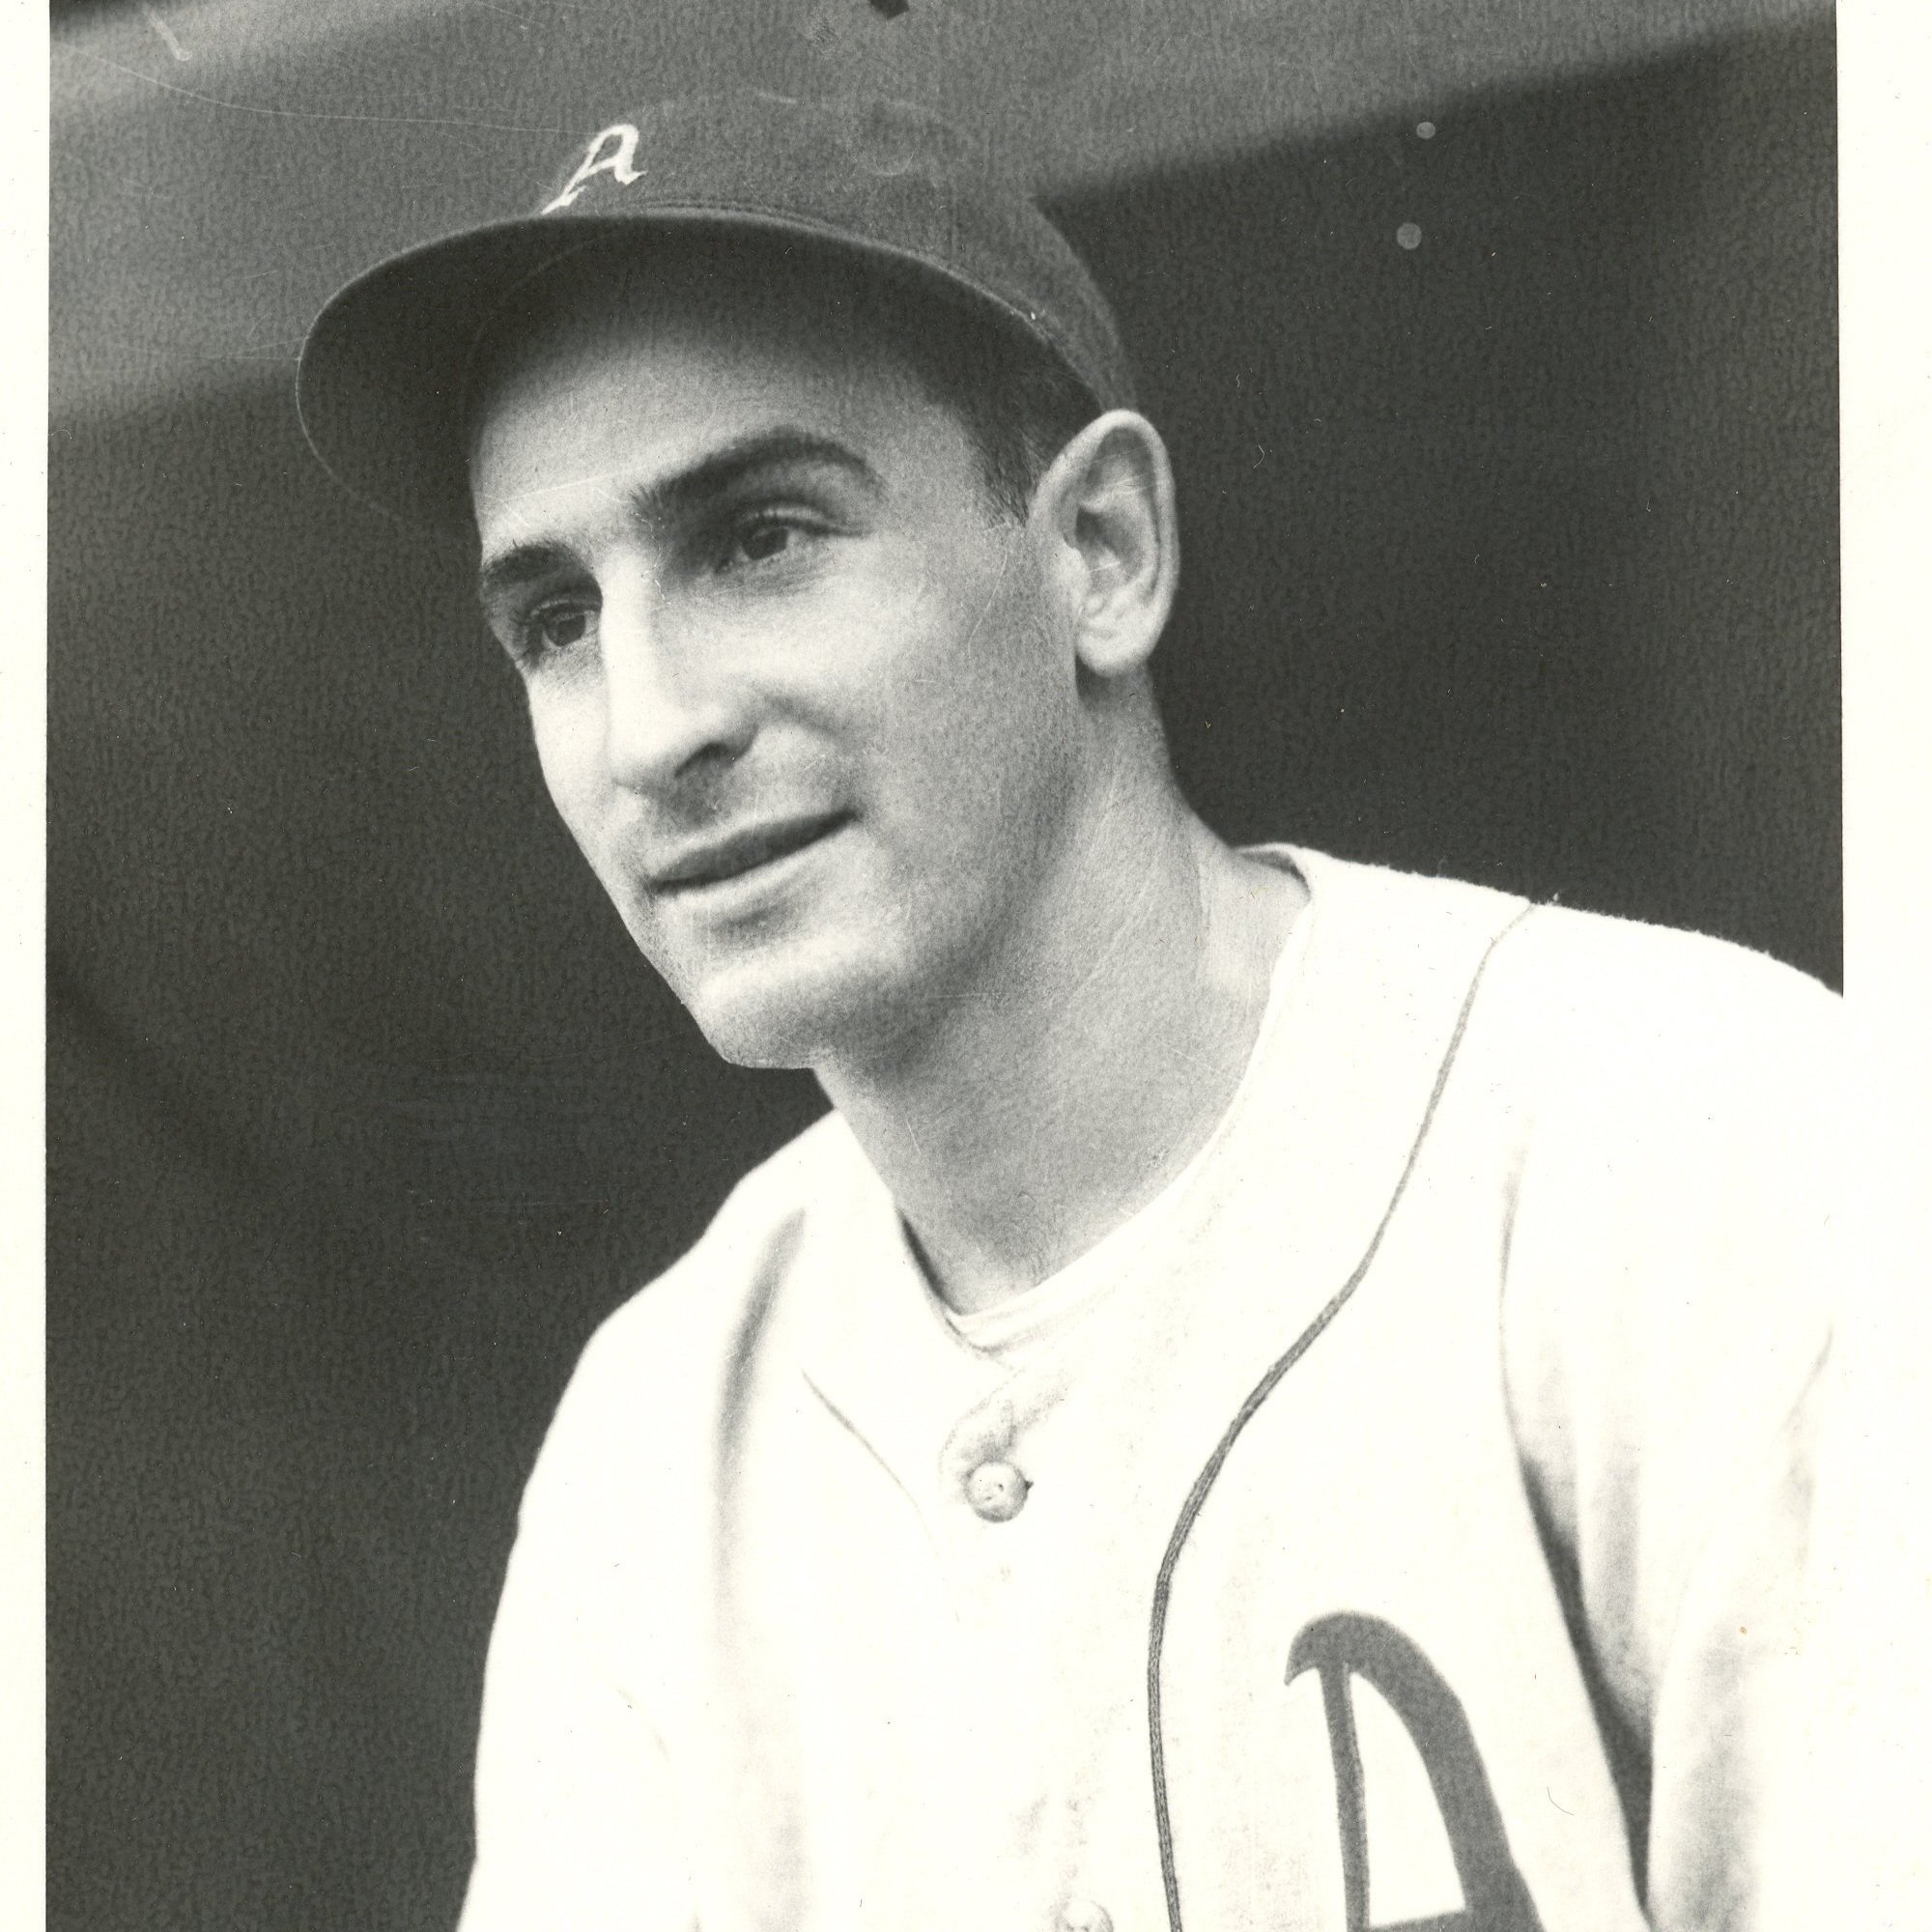 Grandfather Lou Ciola pitched for the Philadelphia Athletics in 1943